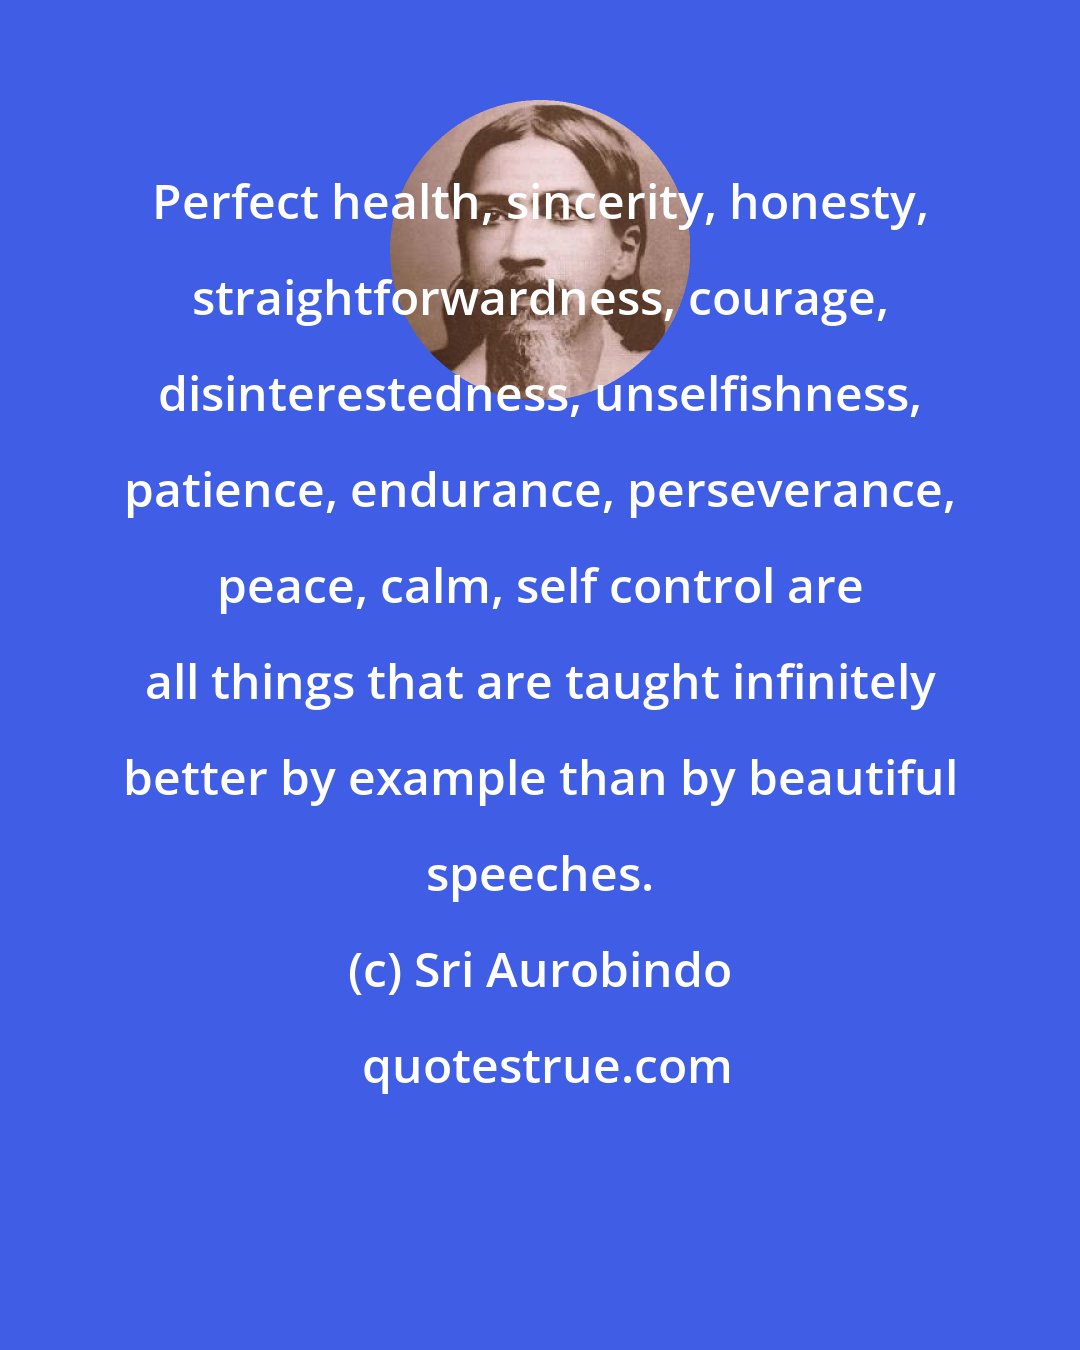 Sri Aurobindo: Perfect health, sincerity, honesty, straightforwardness, courage, disinterestedness, unselfishness, patience, endurance, perseverance, peace, calm, self control are all things that are taught infinitely better by example than by beautiful speeches.